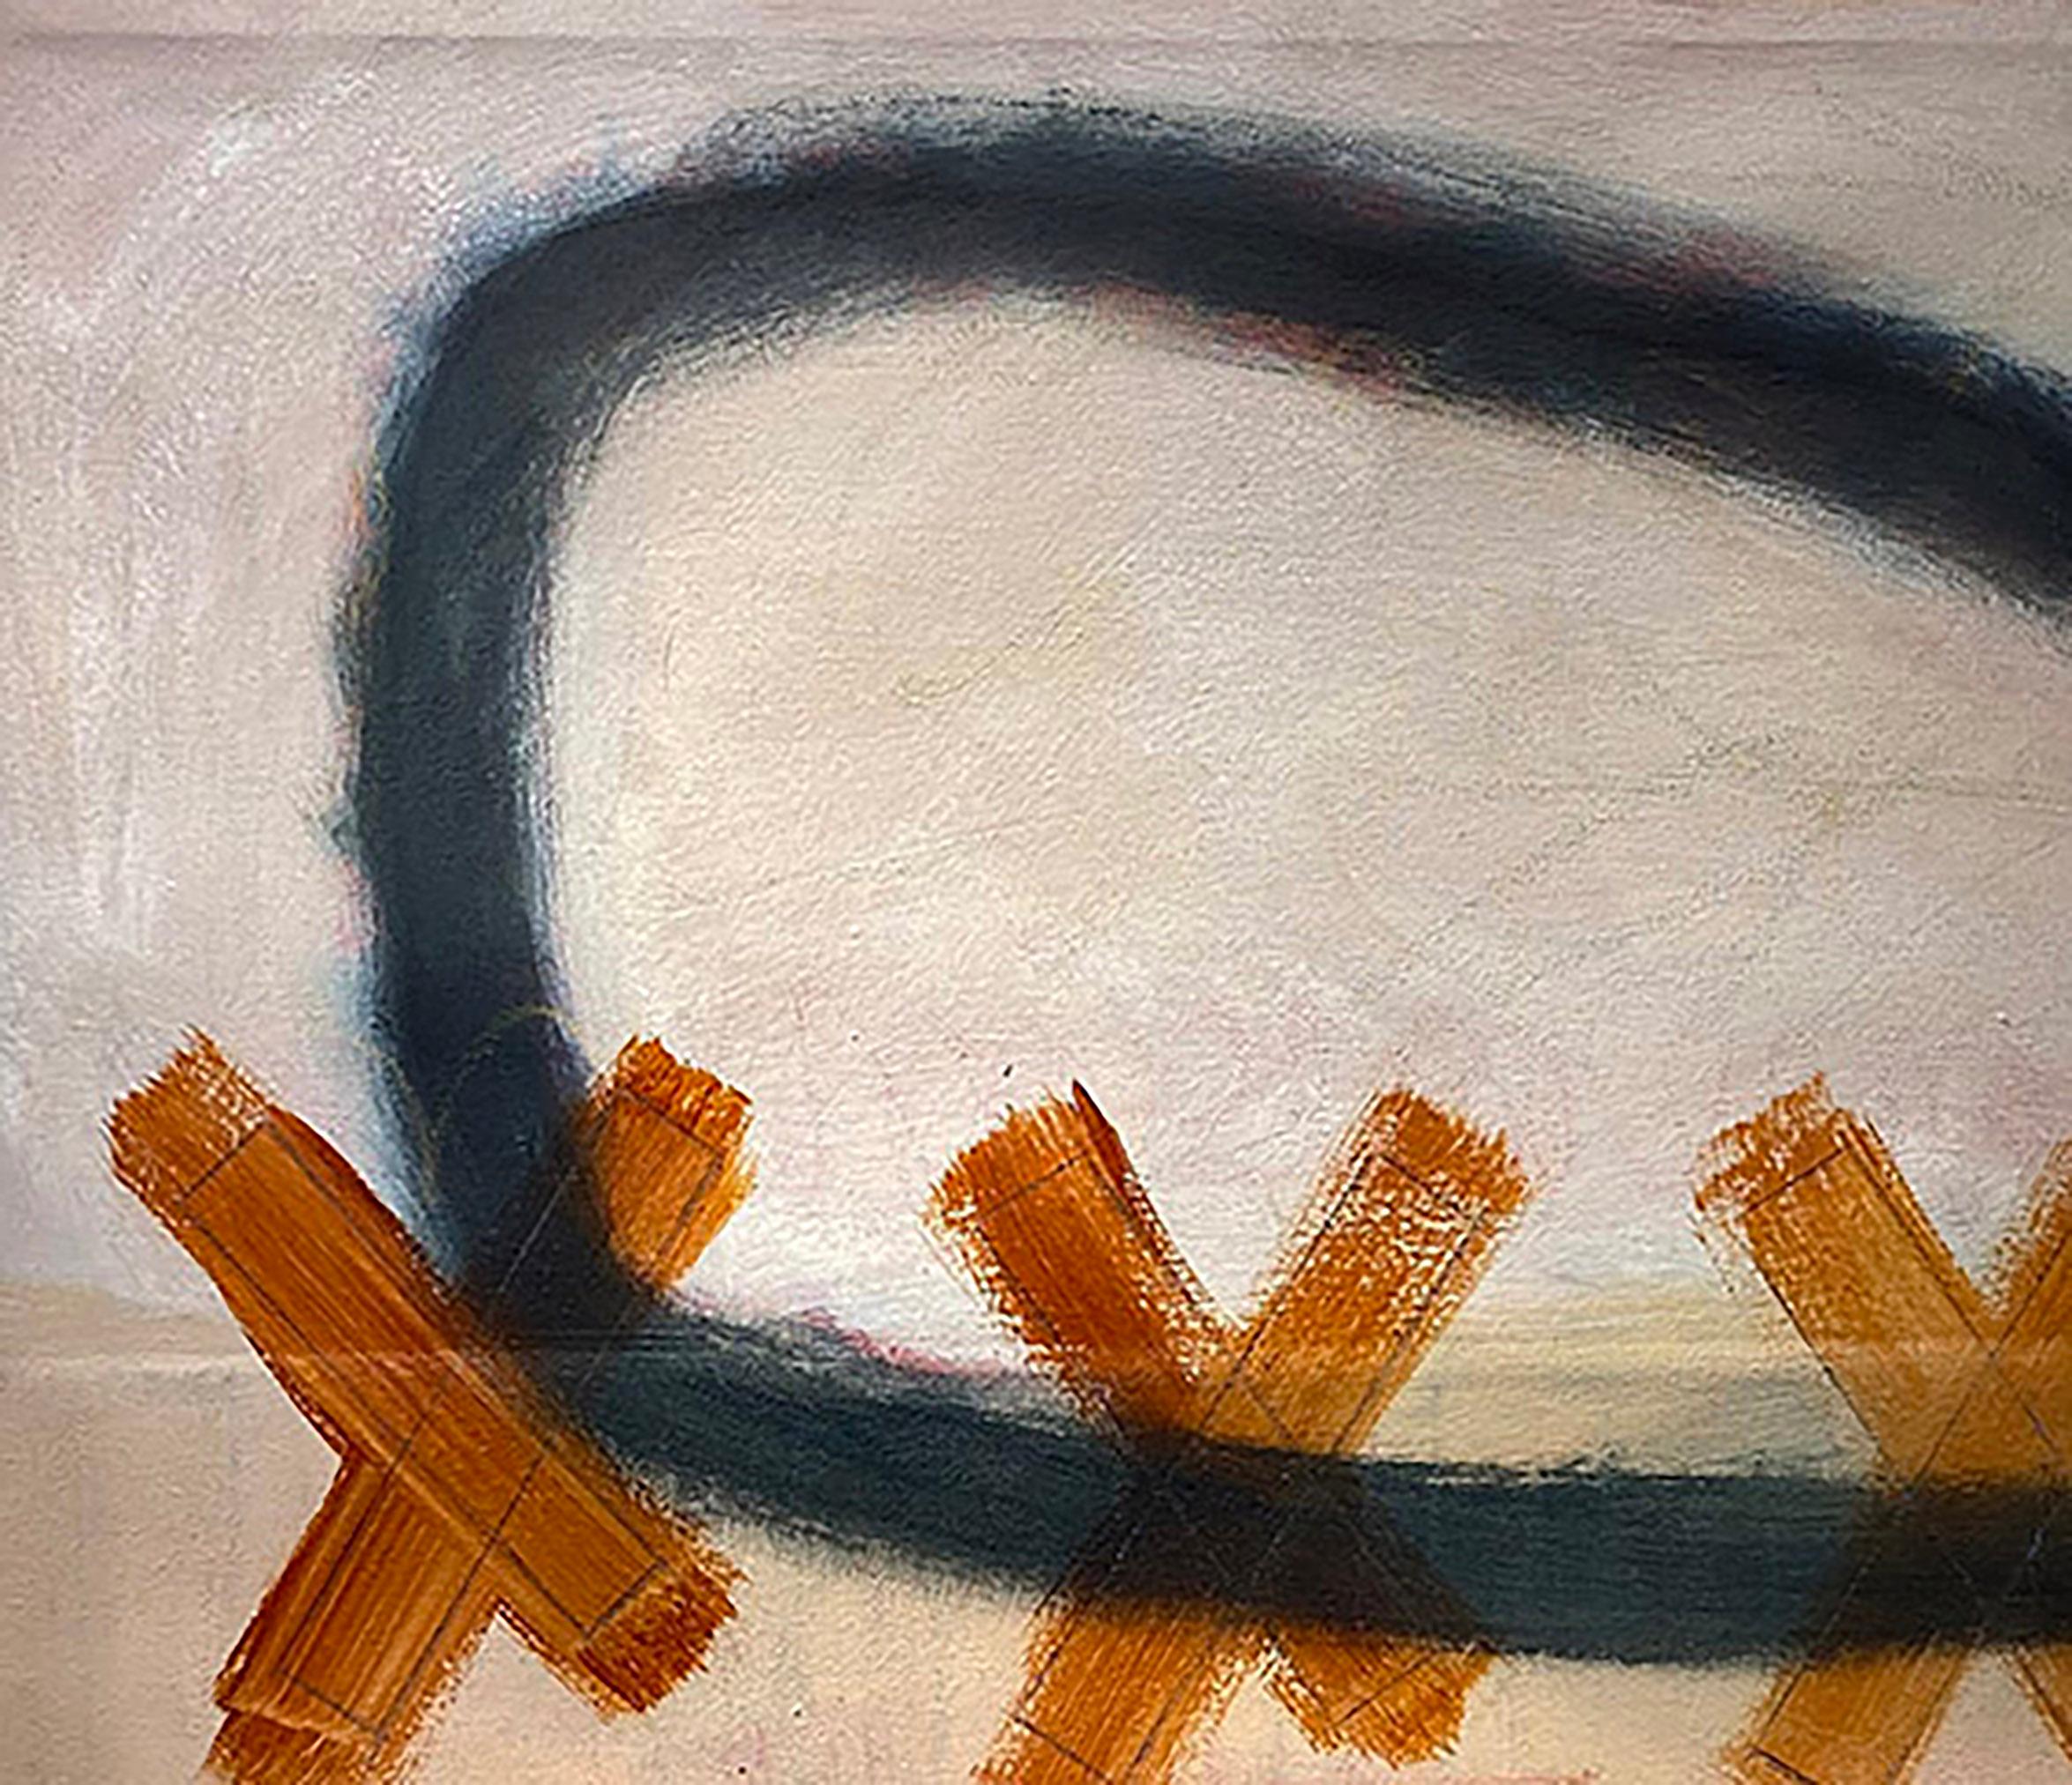 Ted Dixon is a Black painter working primarily in abstraction. He writes: 